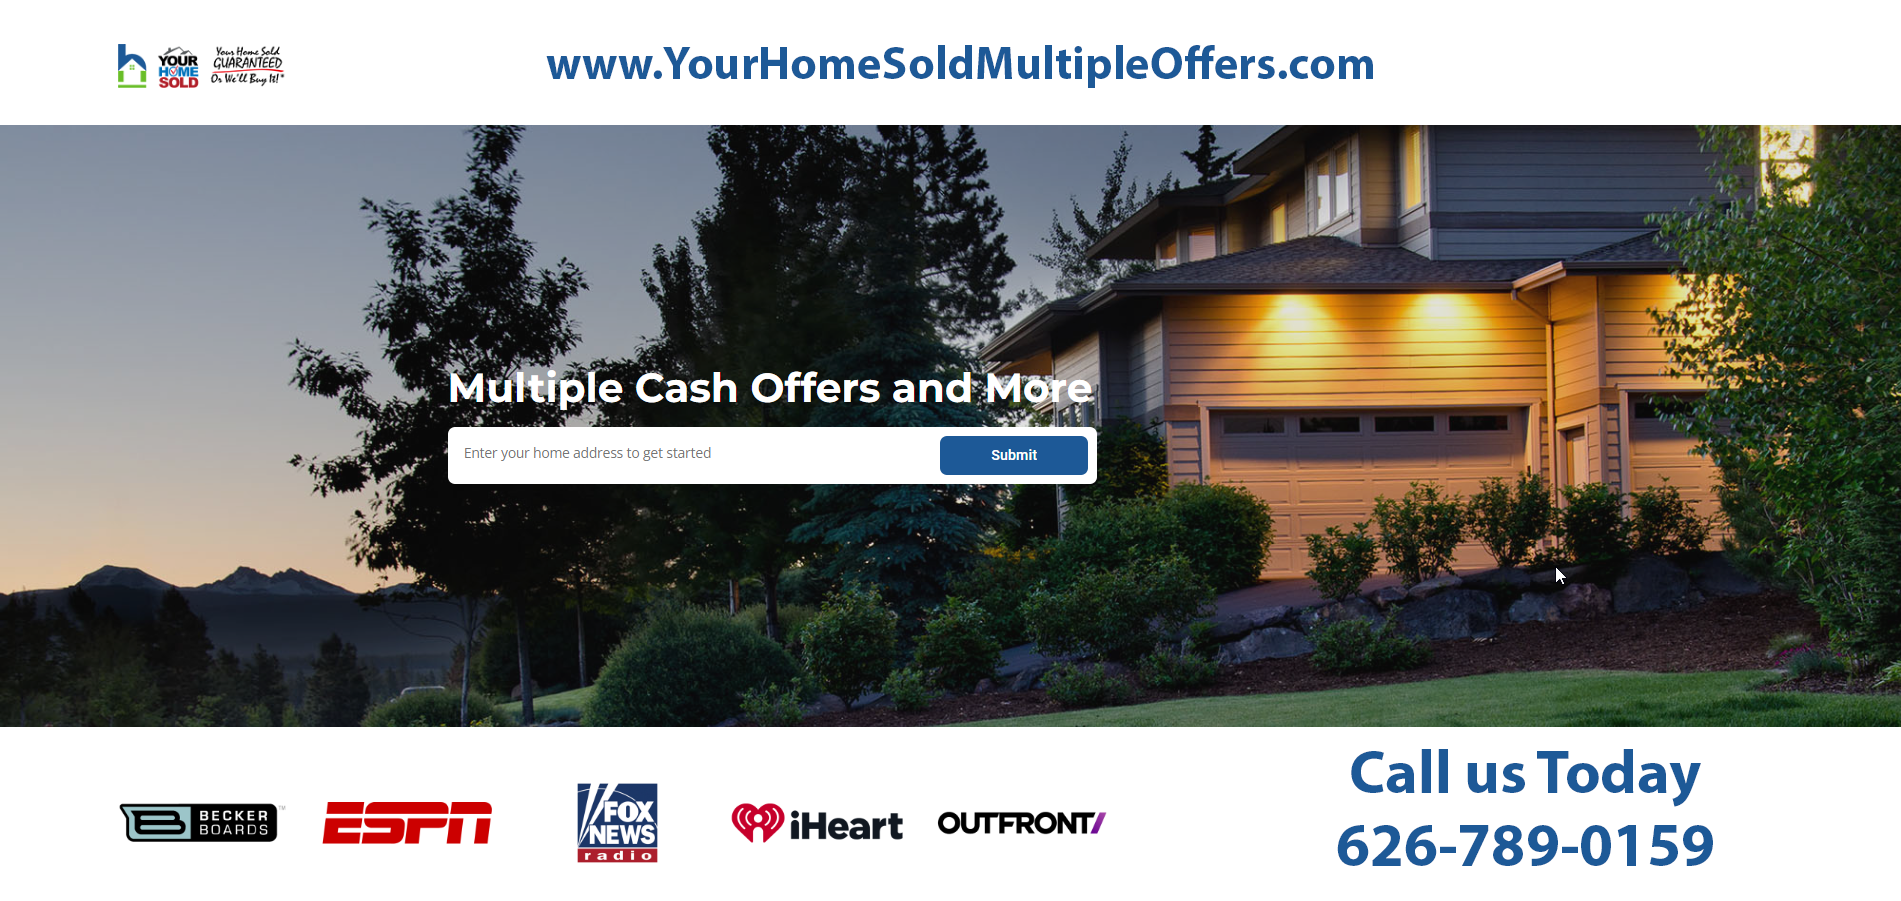 Your-Home-Sold-Guaranteed-Realty-Launches-Revolutionary-Guaranteed-Cash-Offer-Program-to-Provide-Certainty-Convenience-Control-and-Speed-to-Home-Sellers-2.png